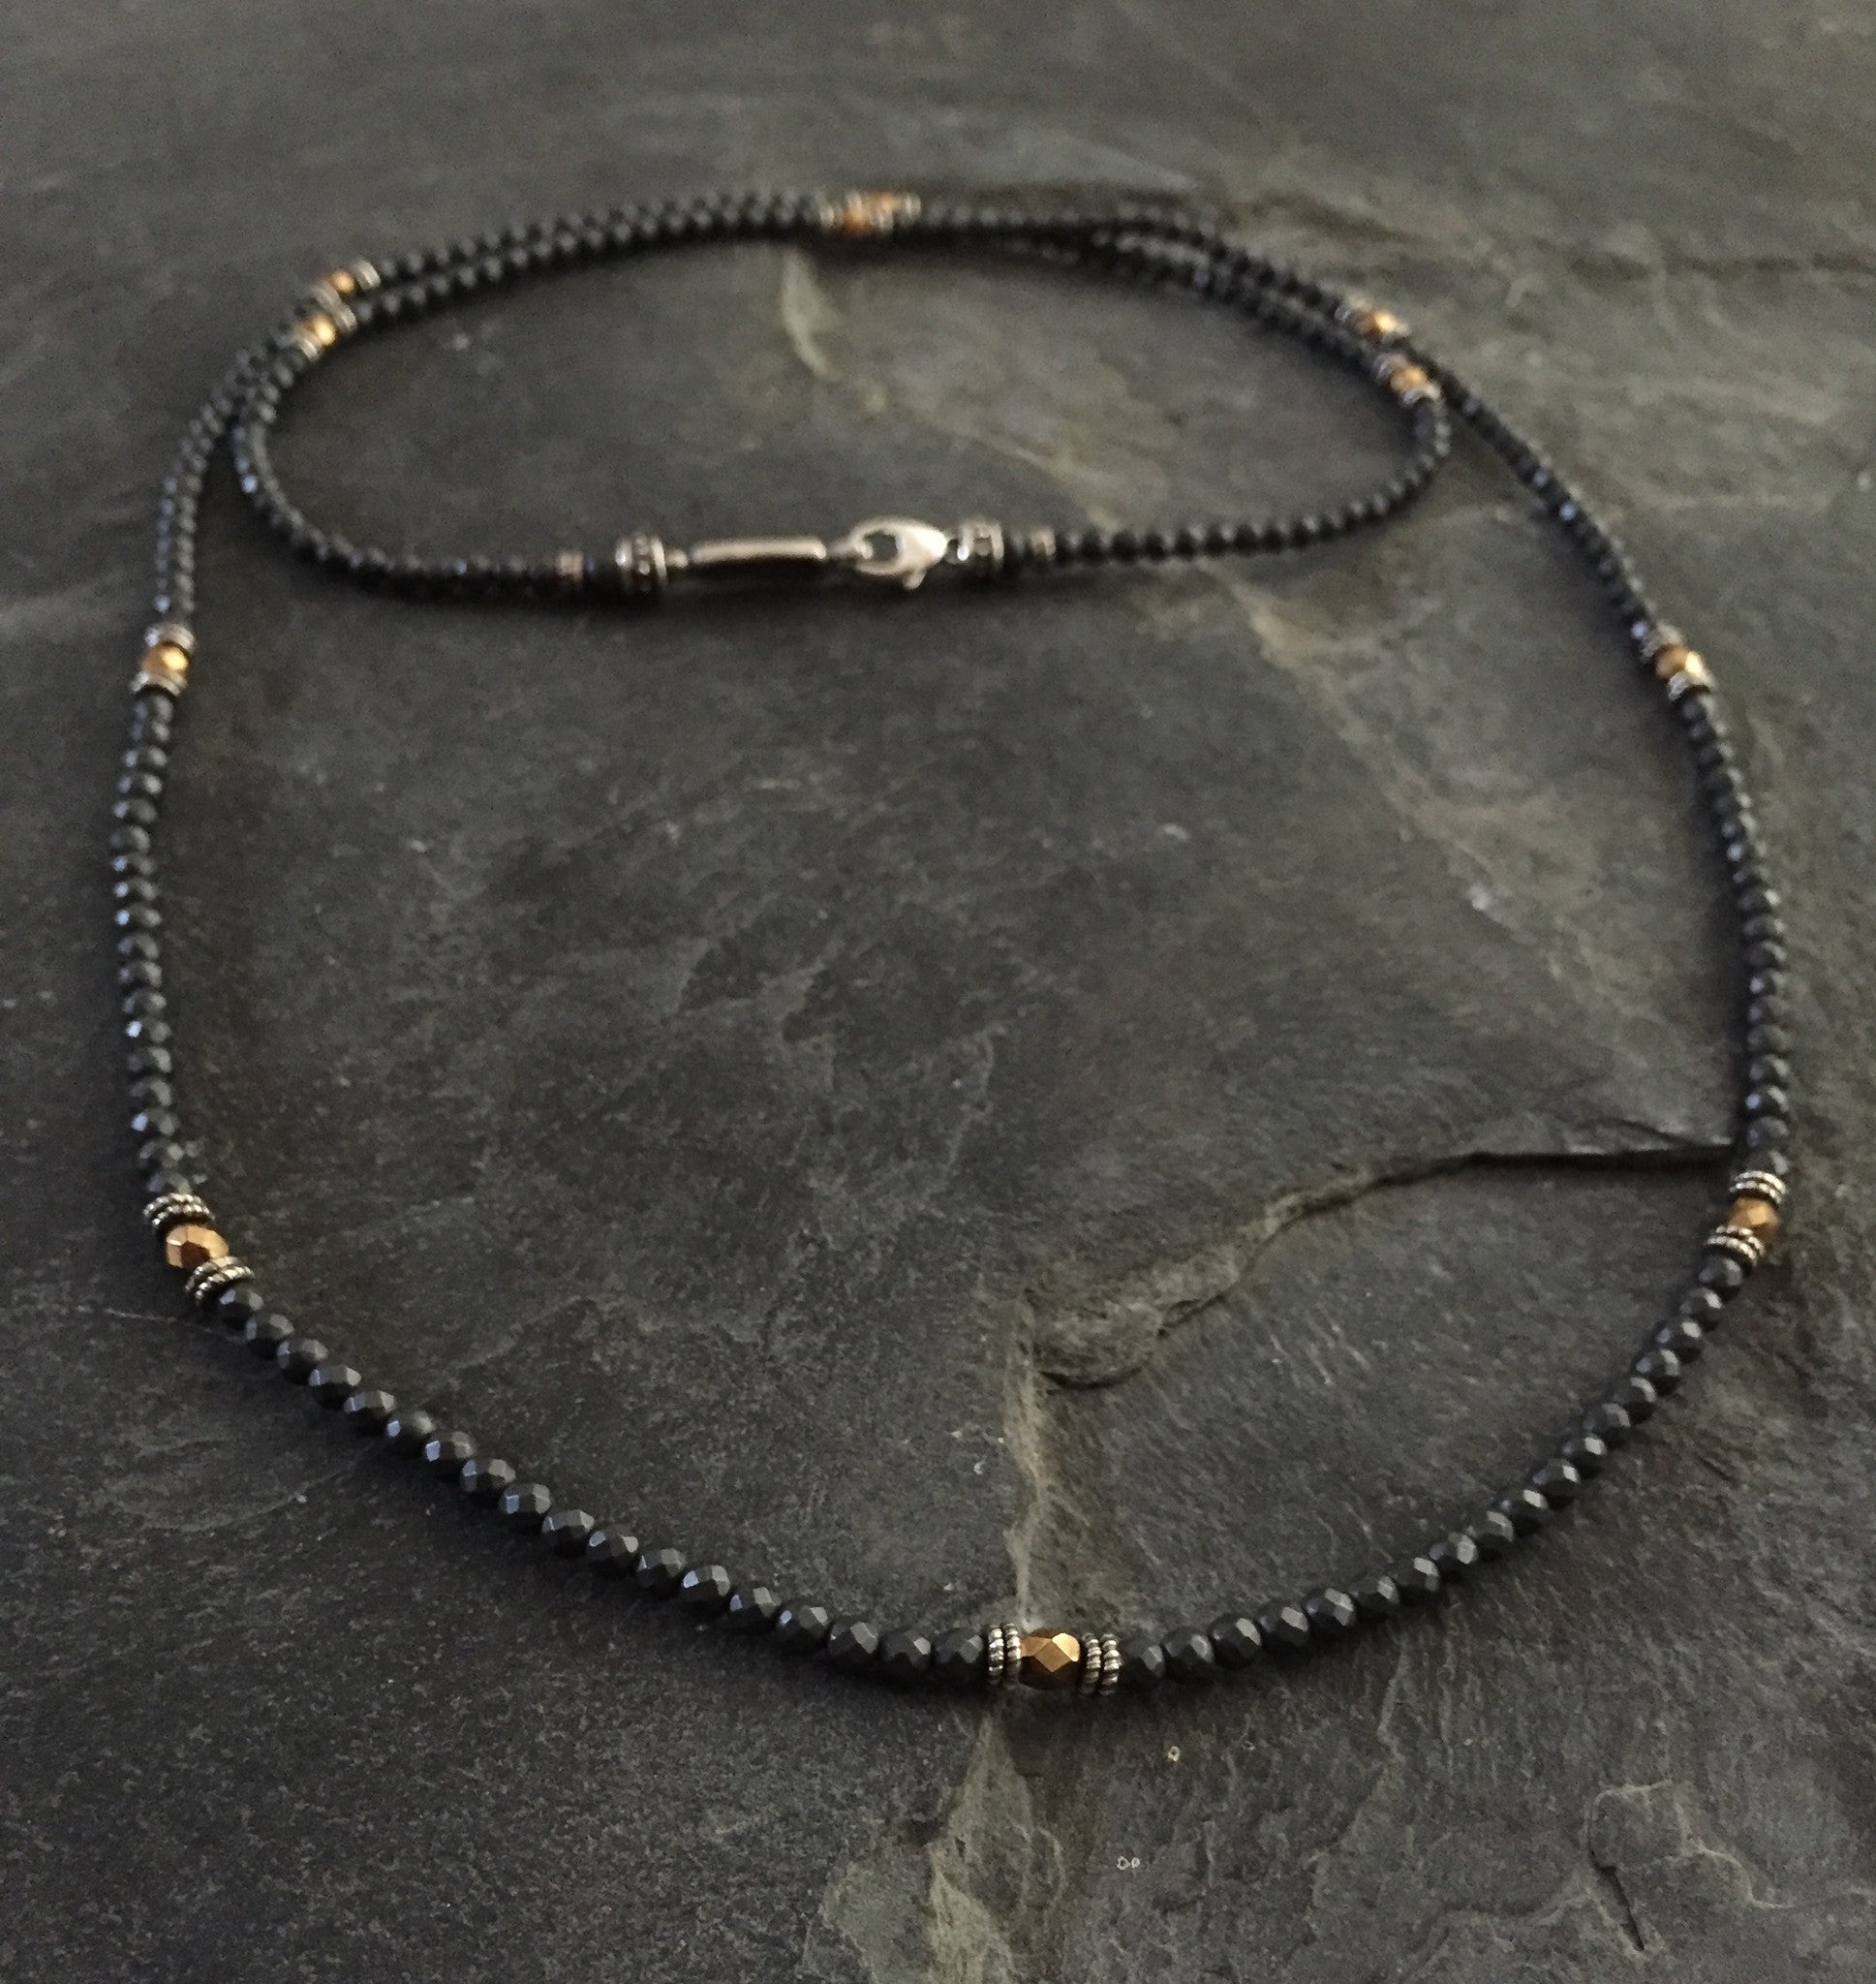 Black onyx and Metal Coated art Beads by Roman Paul